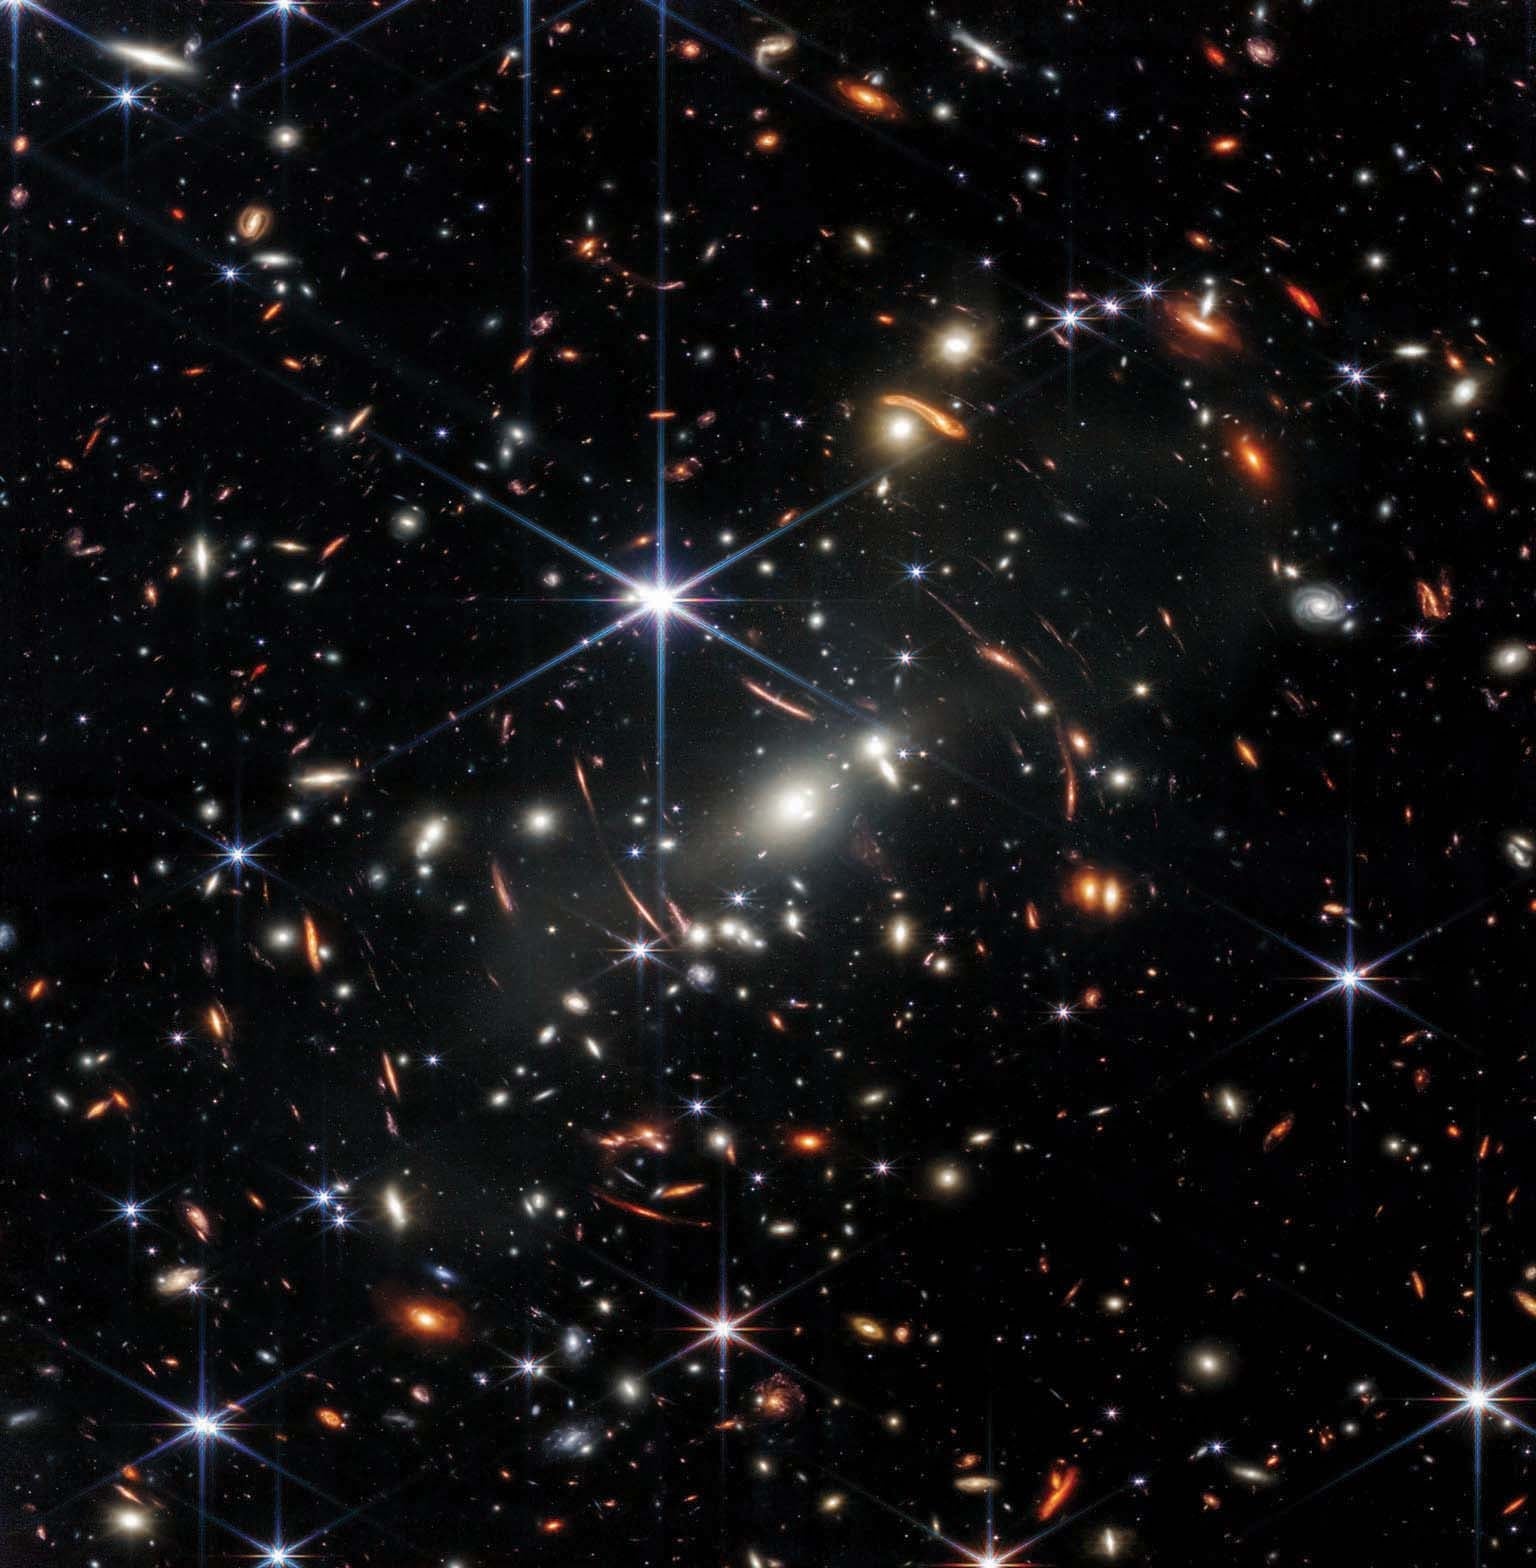 JWST's First Glimpses of Early Galaxies Could Break Cosmology - Scientific American